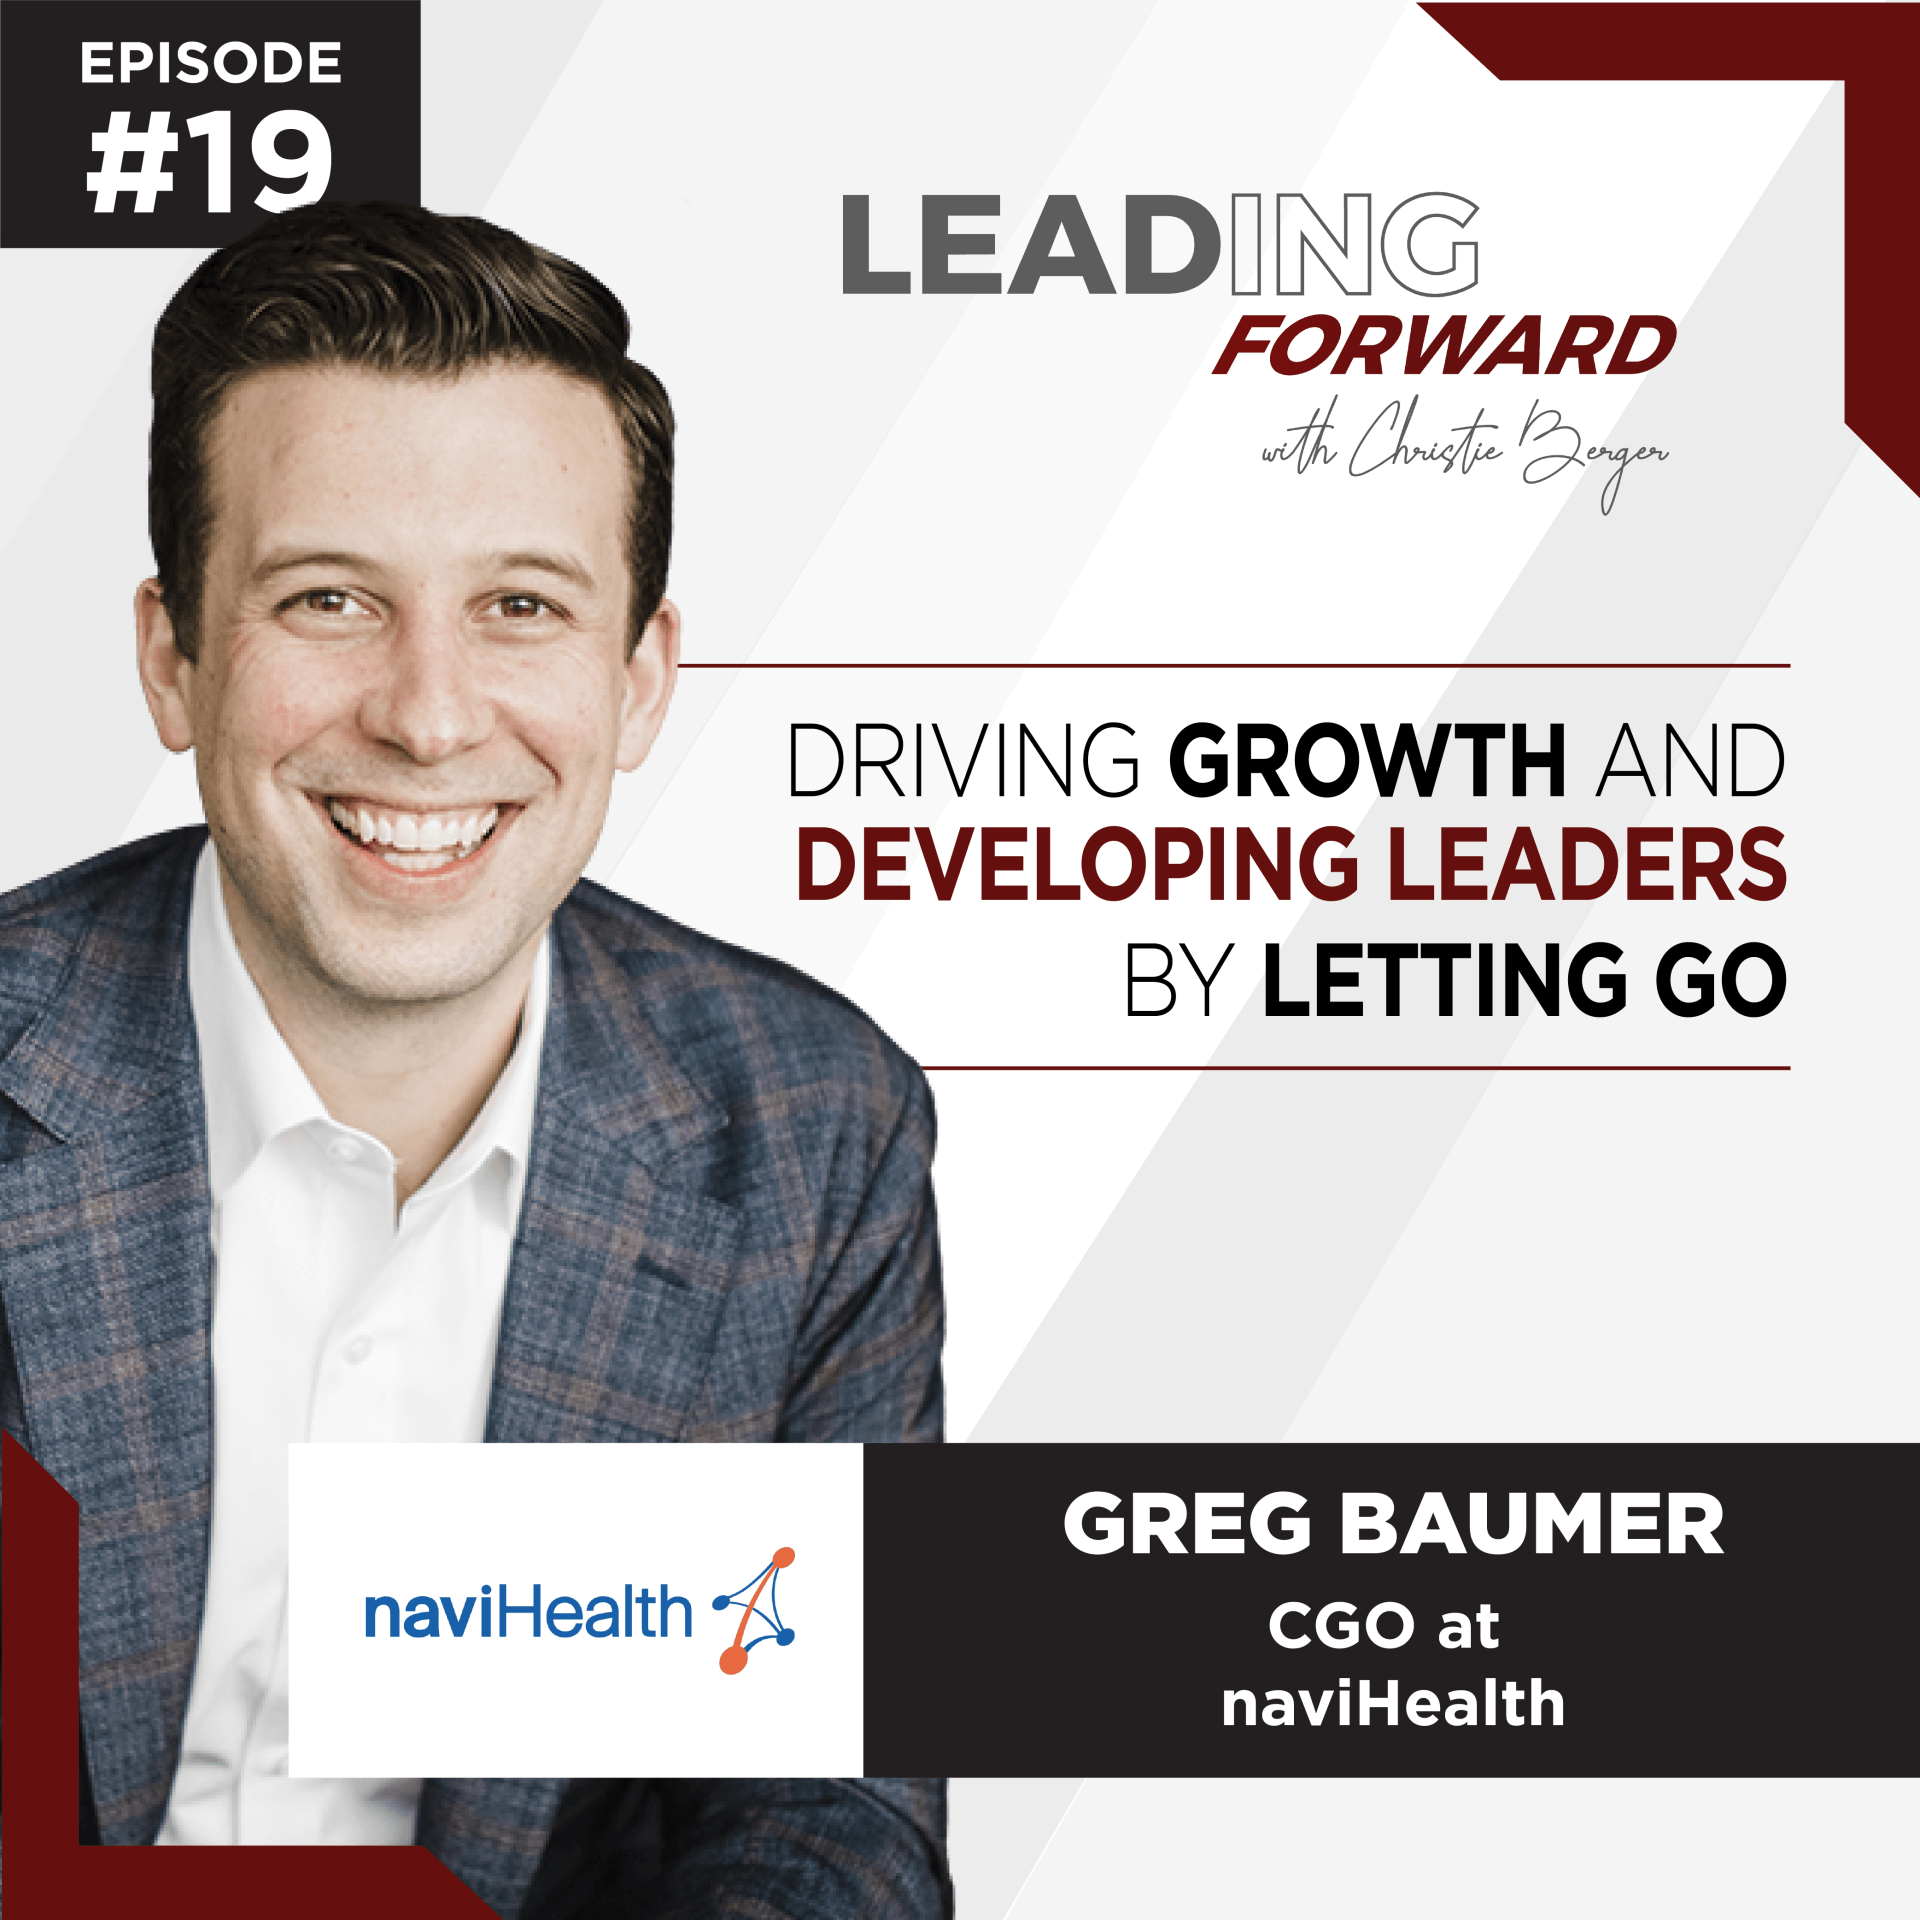 Kip Hallman is the President at Wellpath and was interviewed on Leading Forward-a podcast series full of meaningful conversation with leaders from multiple industries in and around Nashville, TN